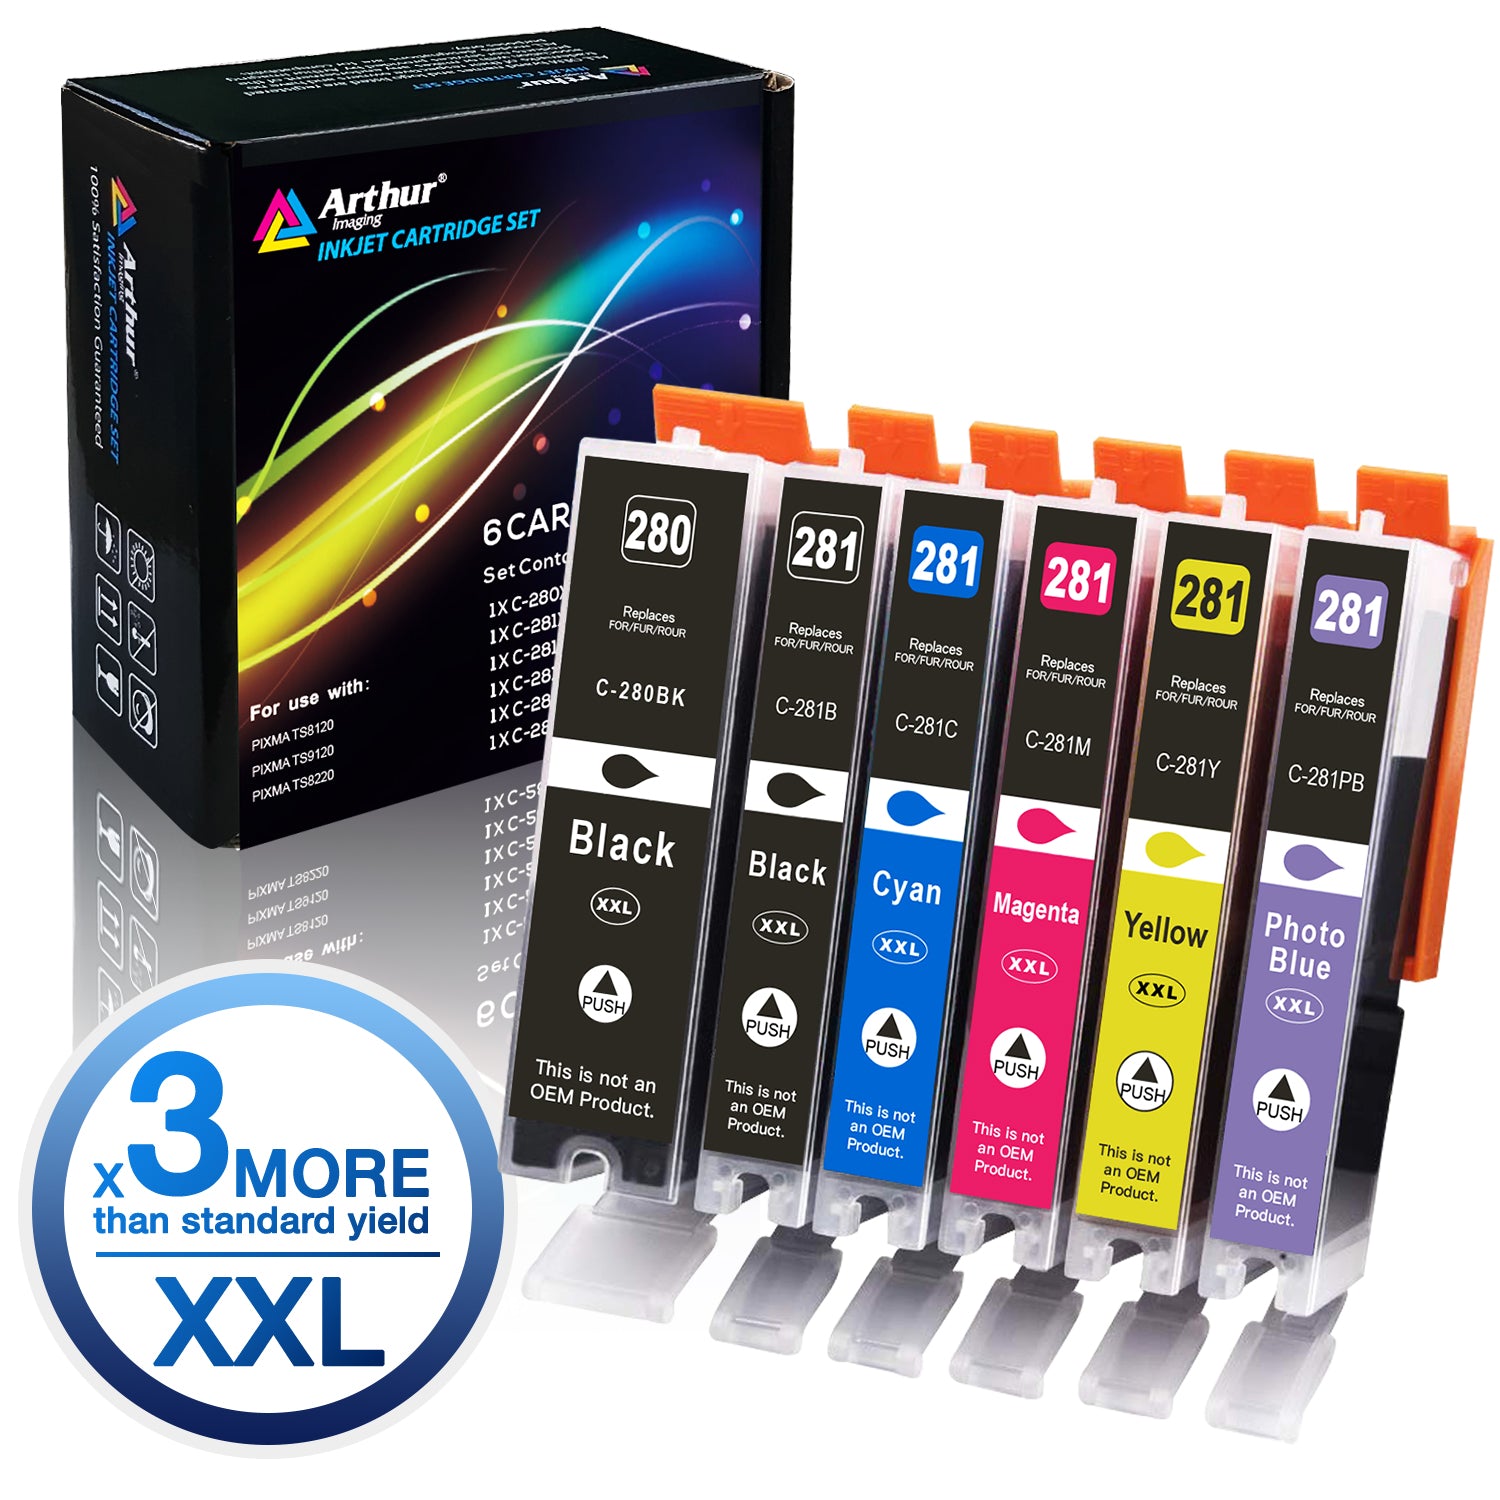 Arthur Imaging Compatible Ink Cartridge Replacement for PGI280XXL CLI281XXL (1 Large Black, 1 Small Black, 1 Cyan, 1 Yellow, 1 Magenta, 1 Photo blue, 6-Pack)